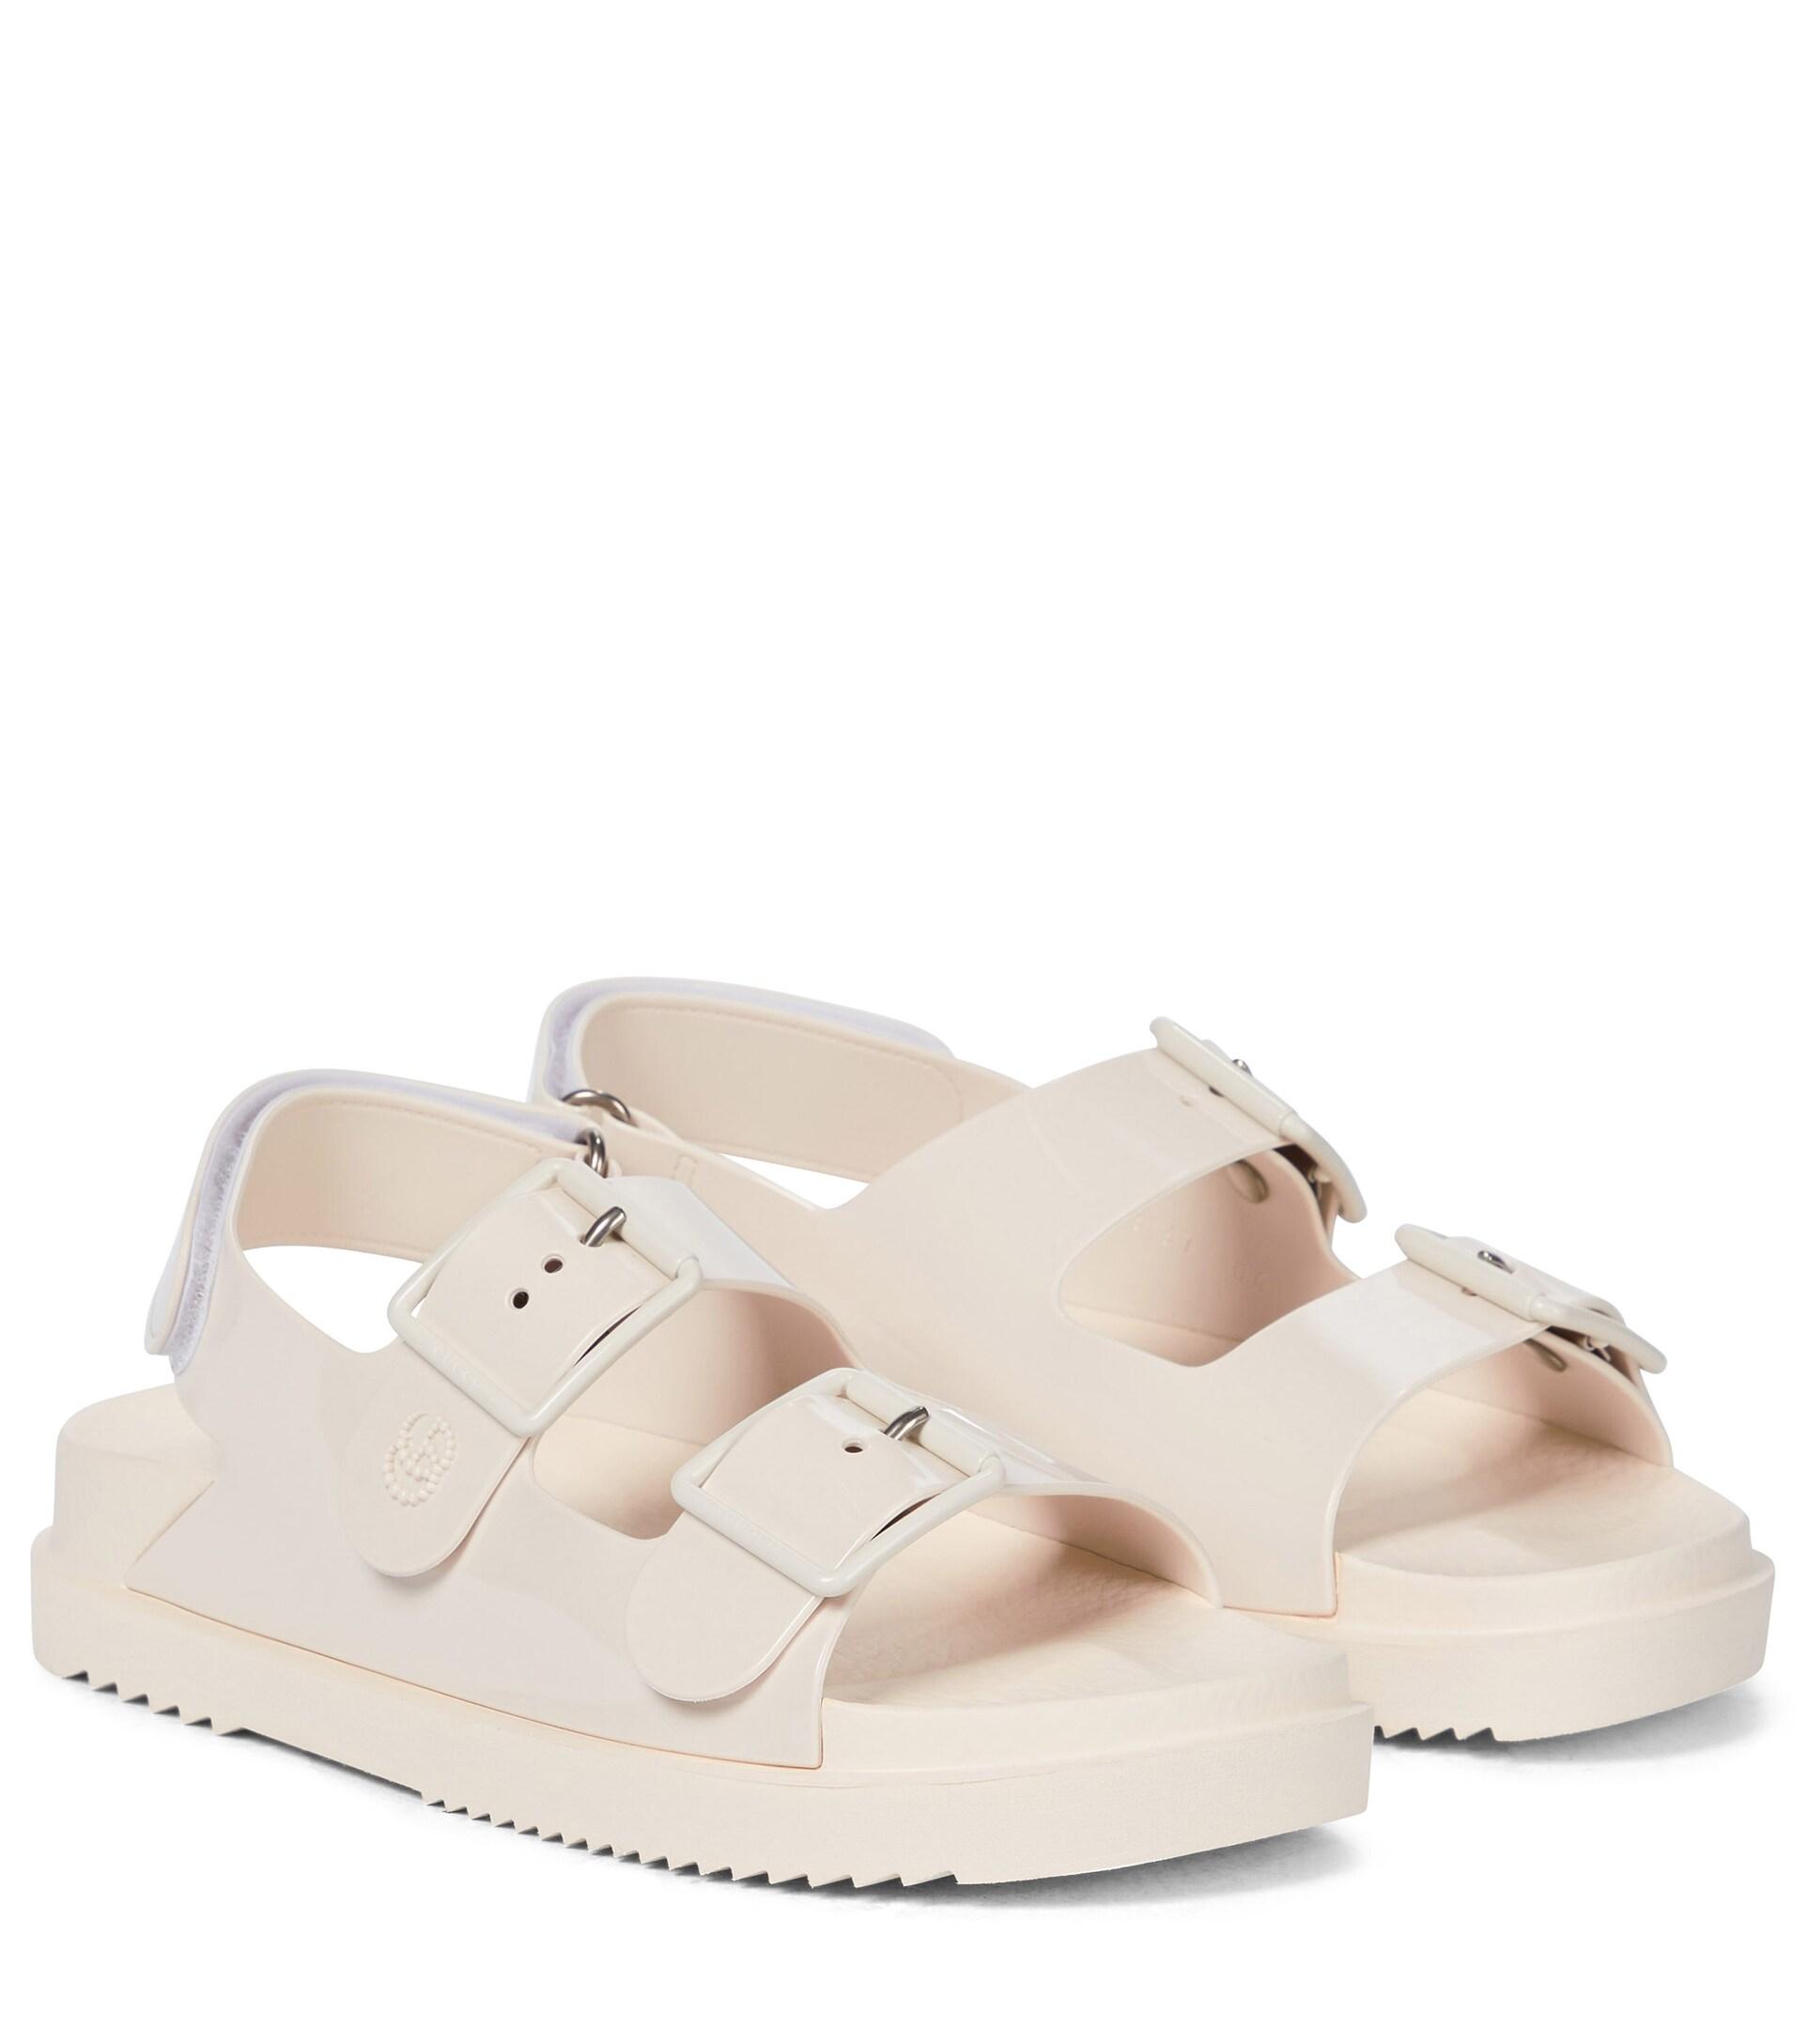 Gucci Rubber Sandals in White | Lyst